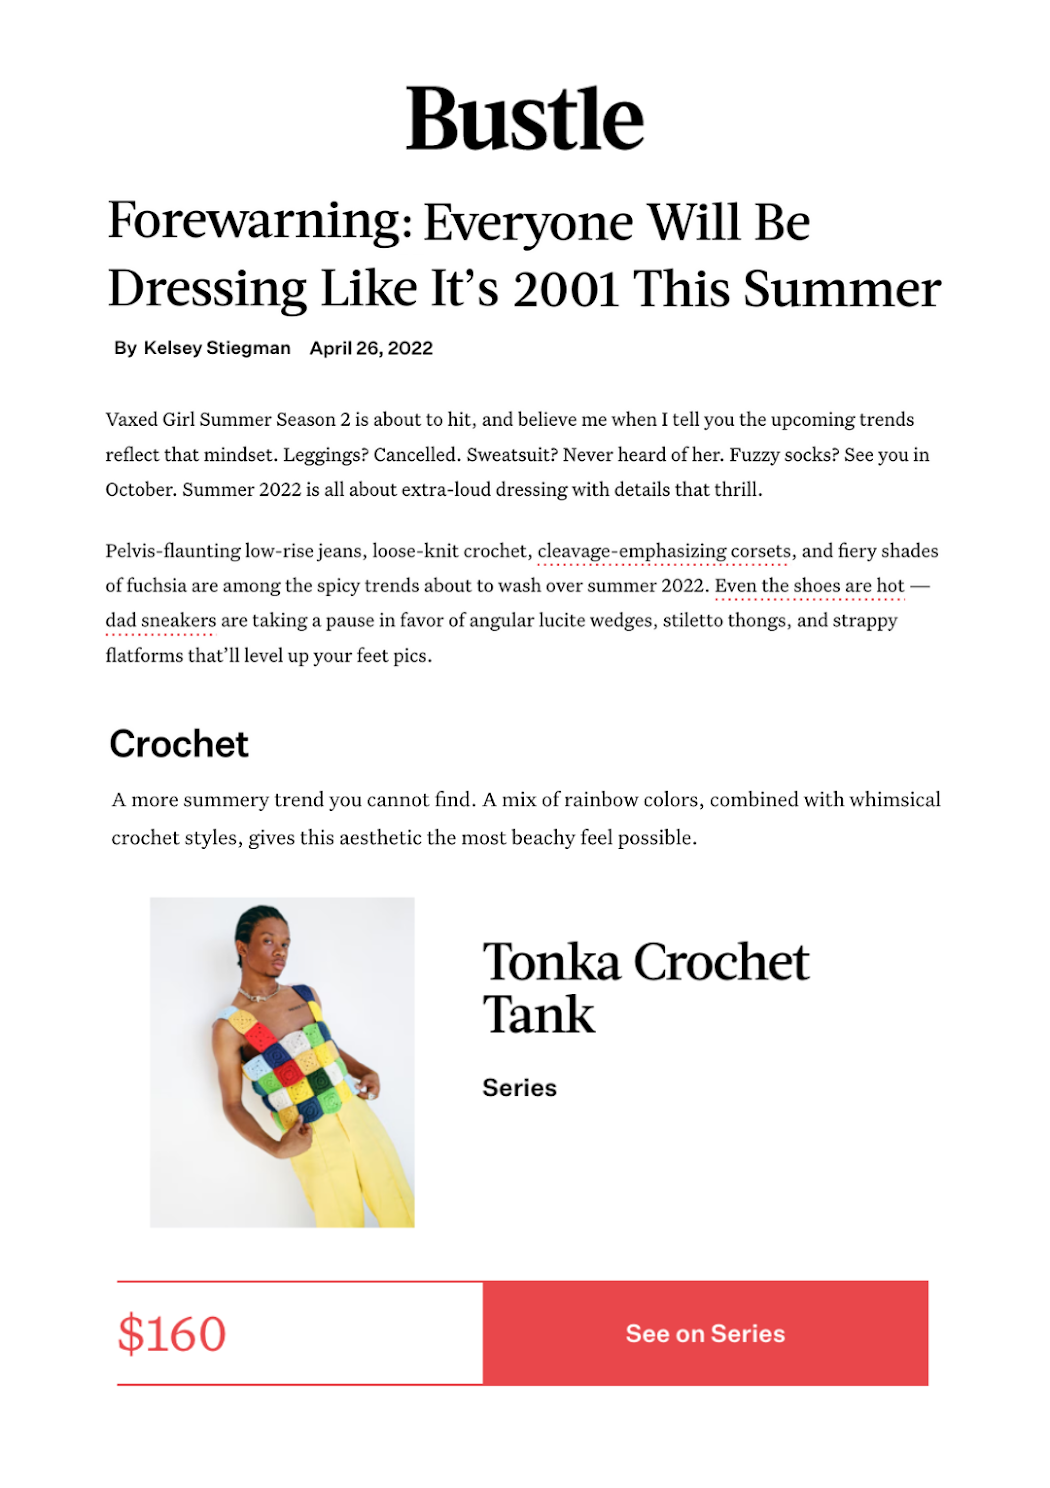 BUSTLE | Forewarning: Everyone Will Be Dressing Like It’s 2001 This Summer